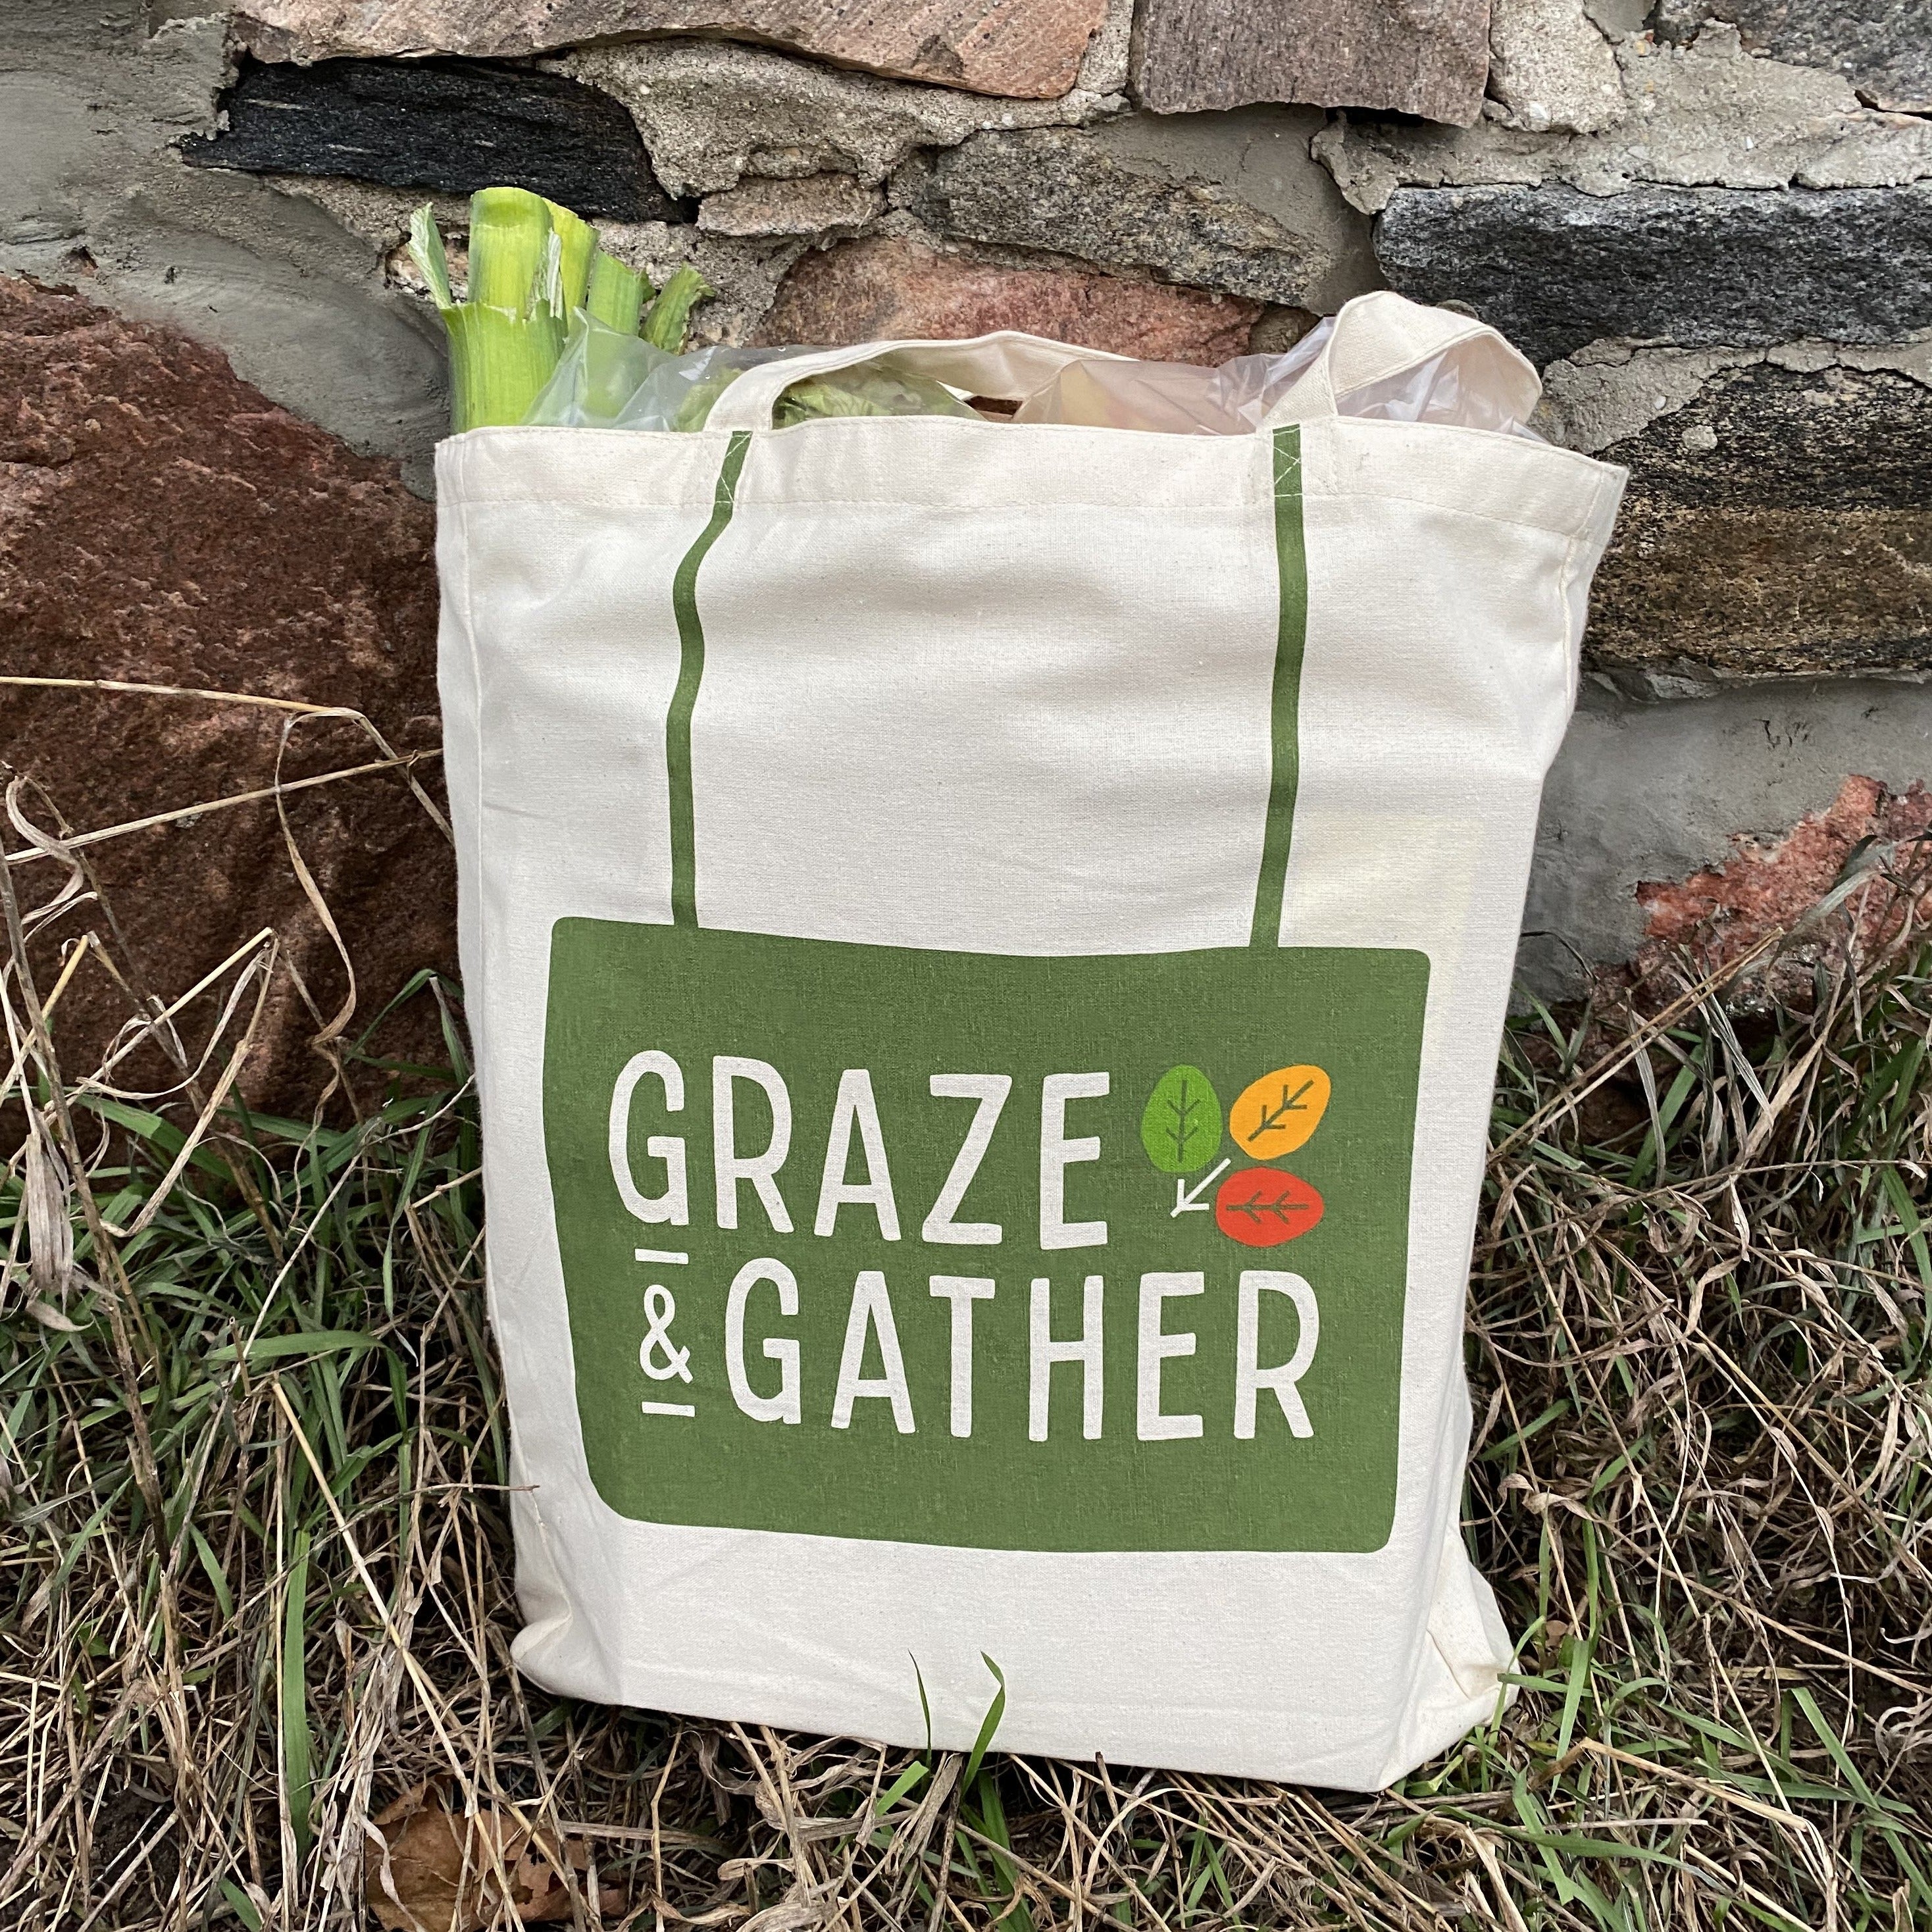 Graze & Gather tote full of veggies in front of stone wall